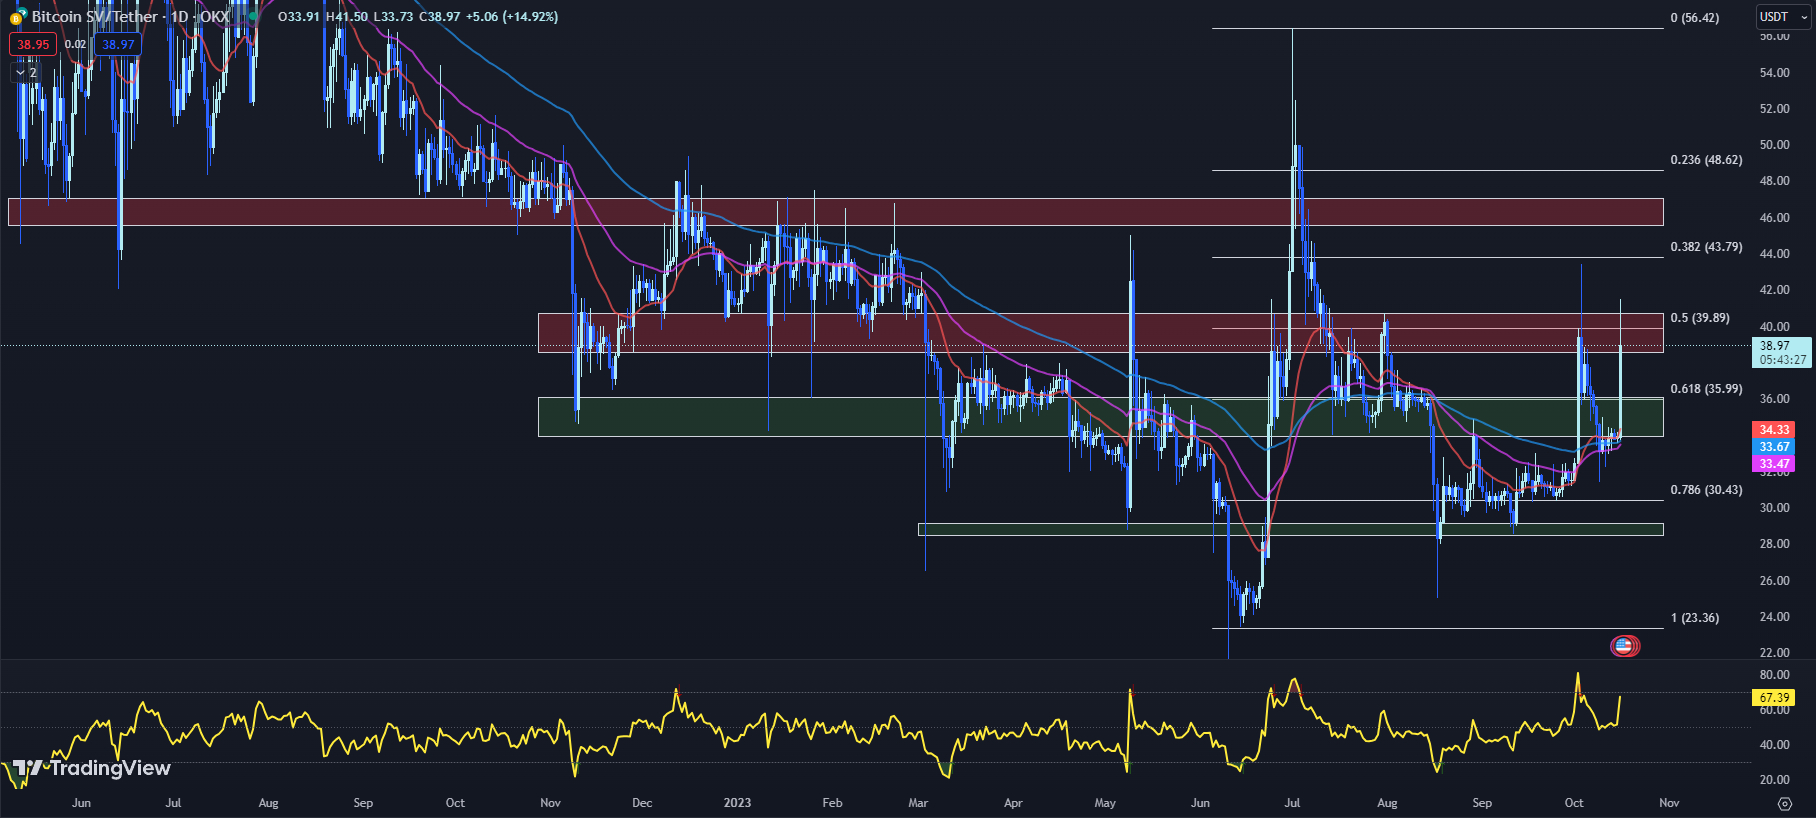 TradingView chart for the BSV price 10-16-23